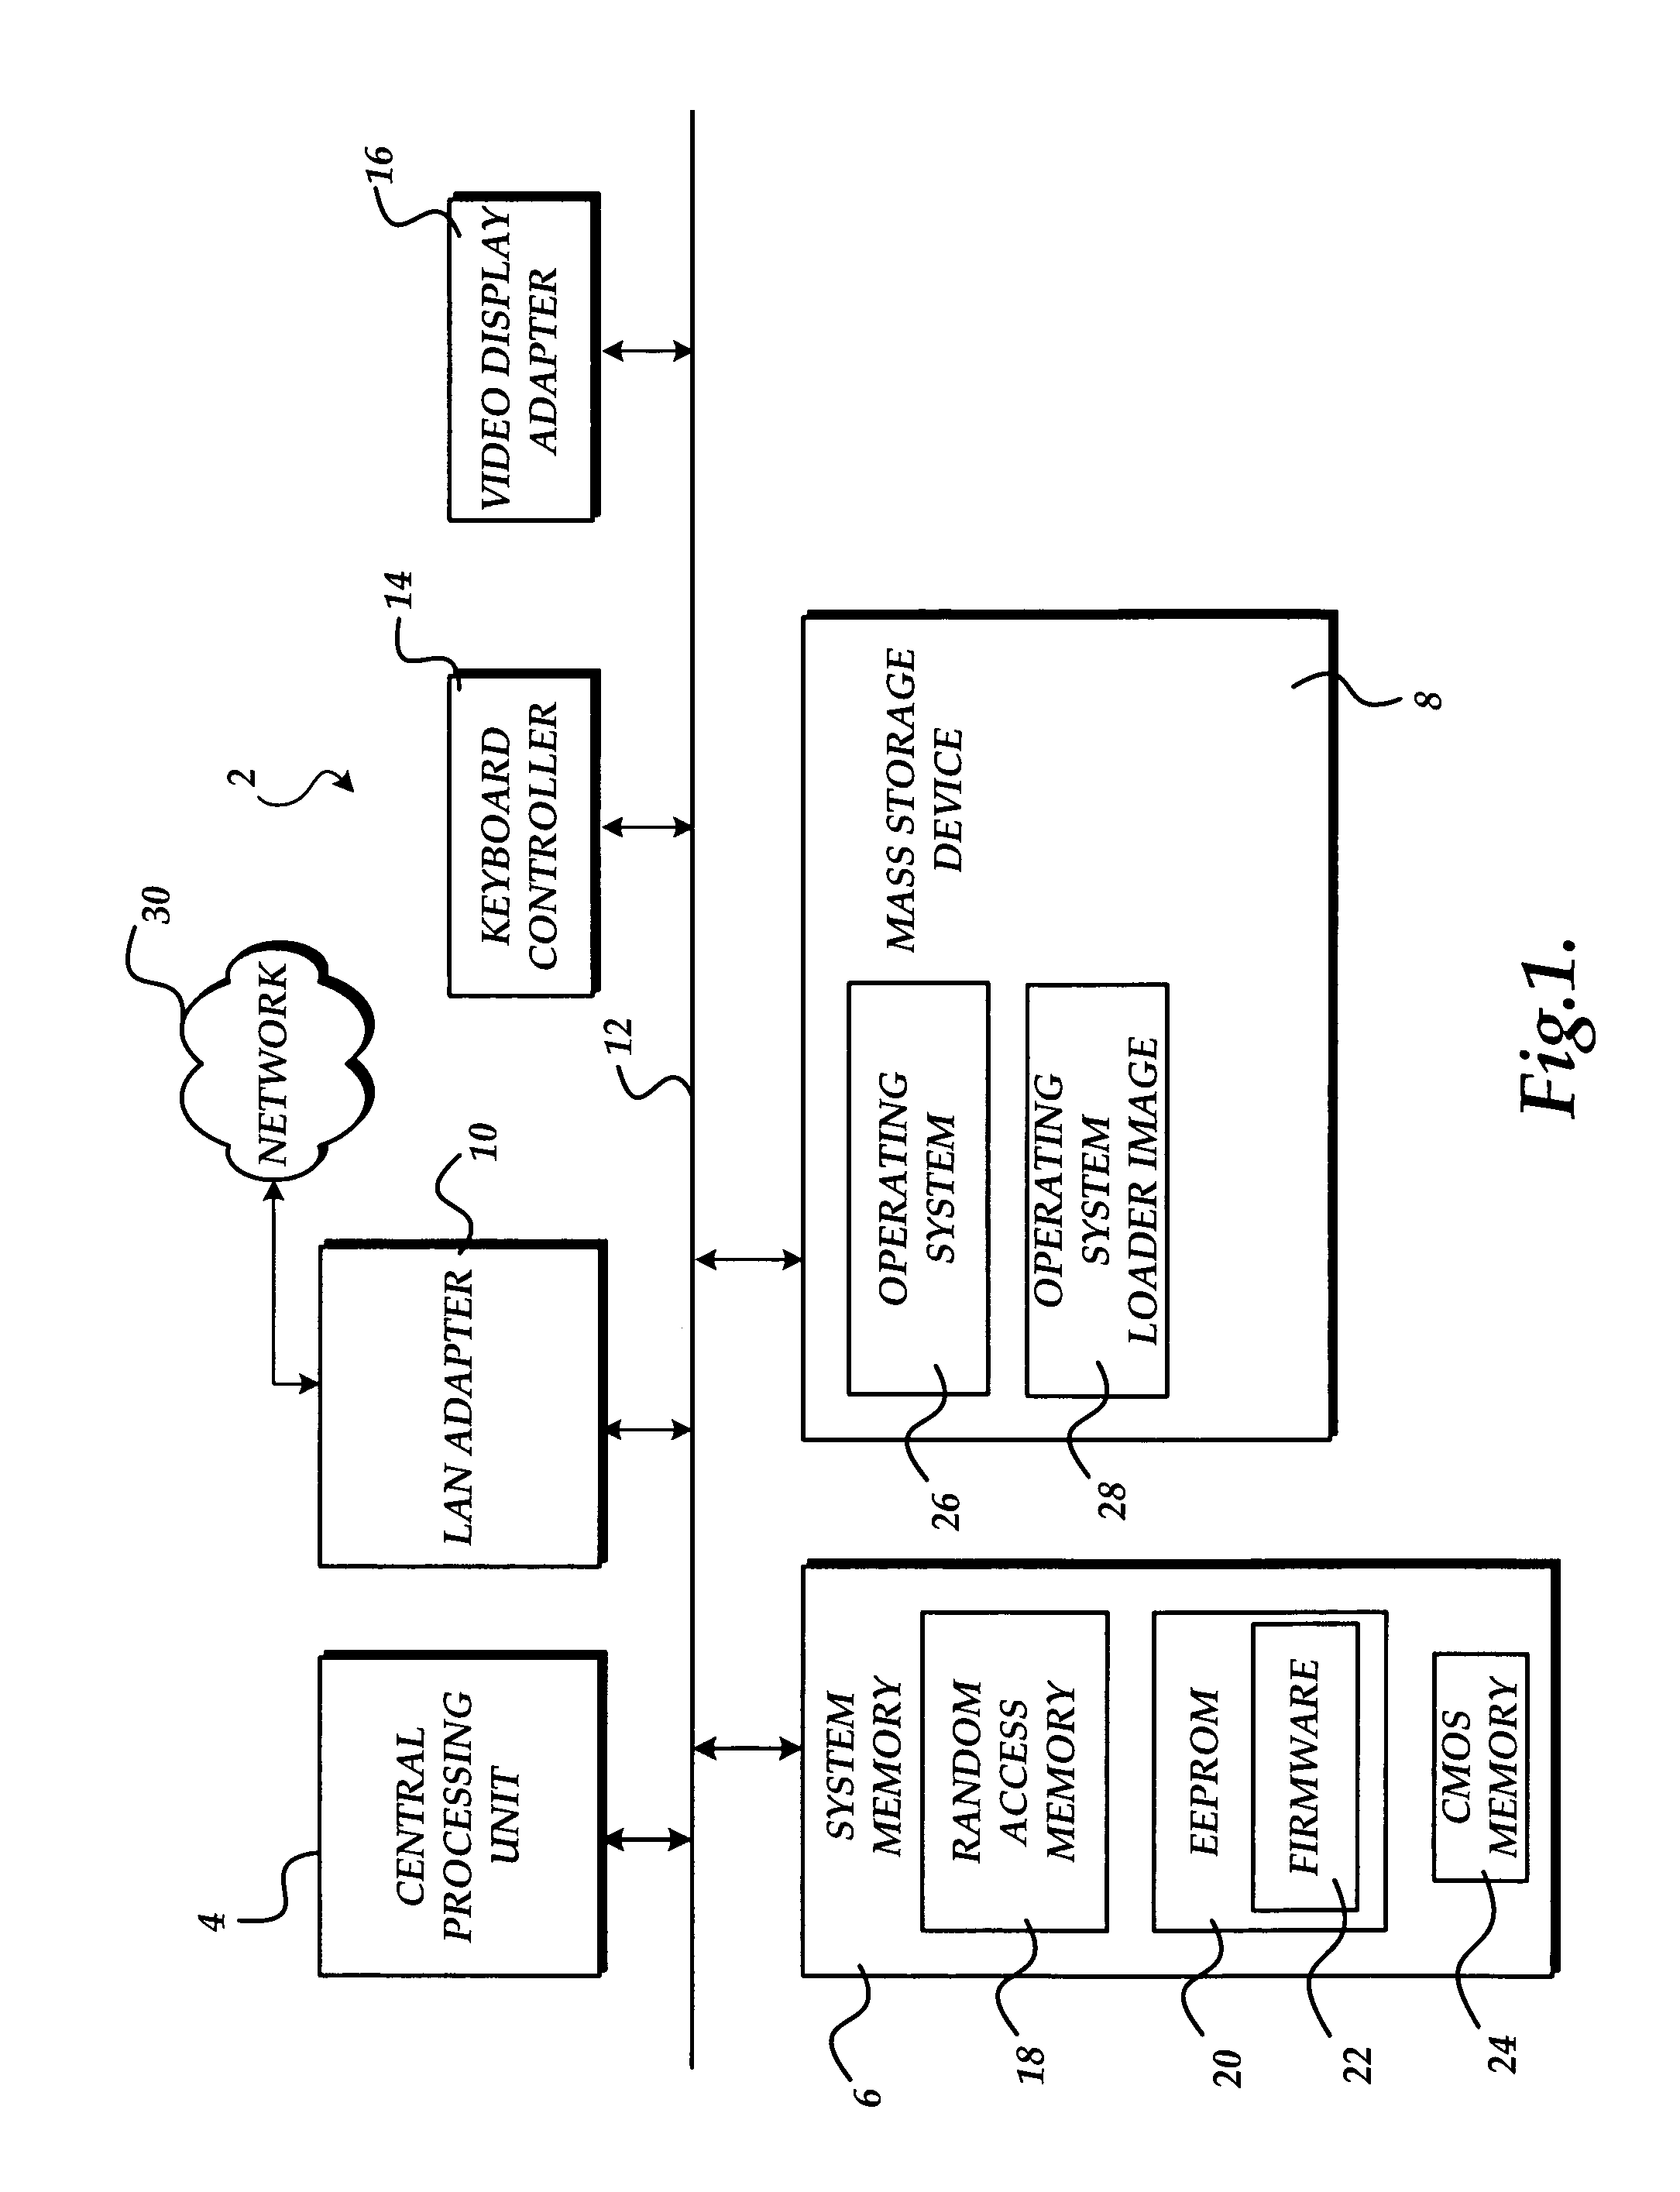 Method, system, and apparatus for providing generic database services within an extensible firmware interface environment